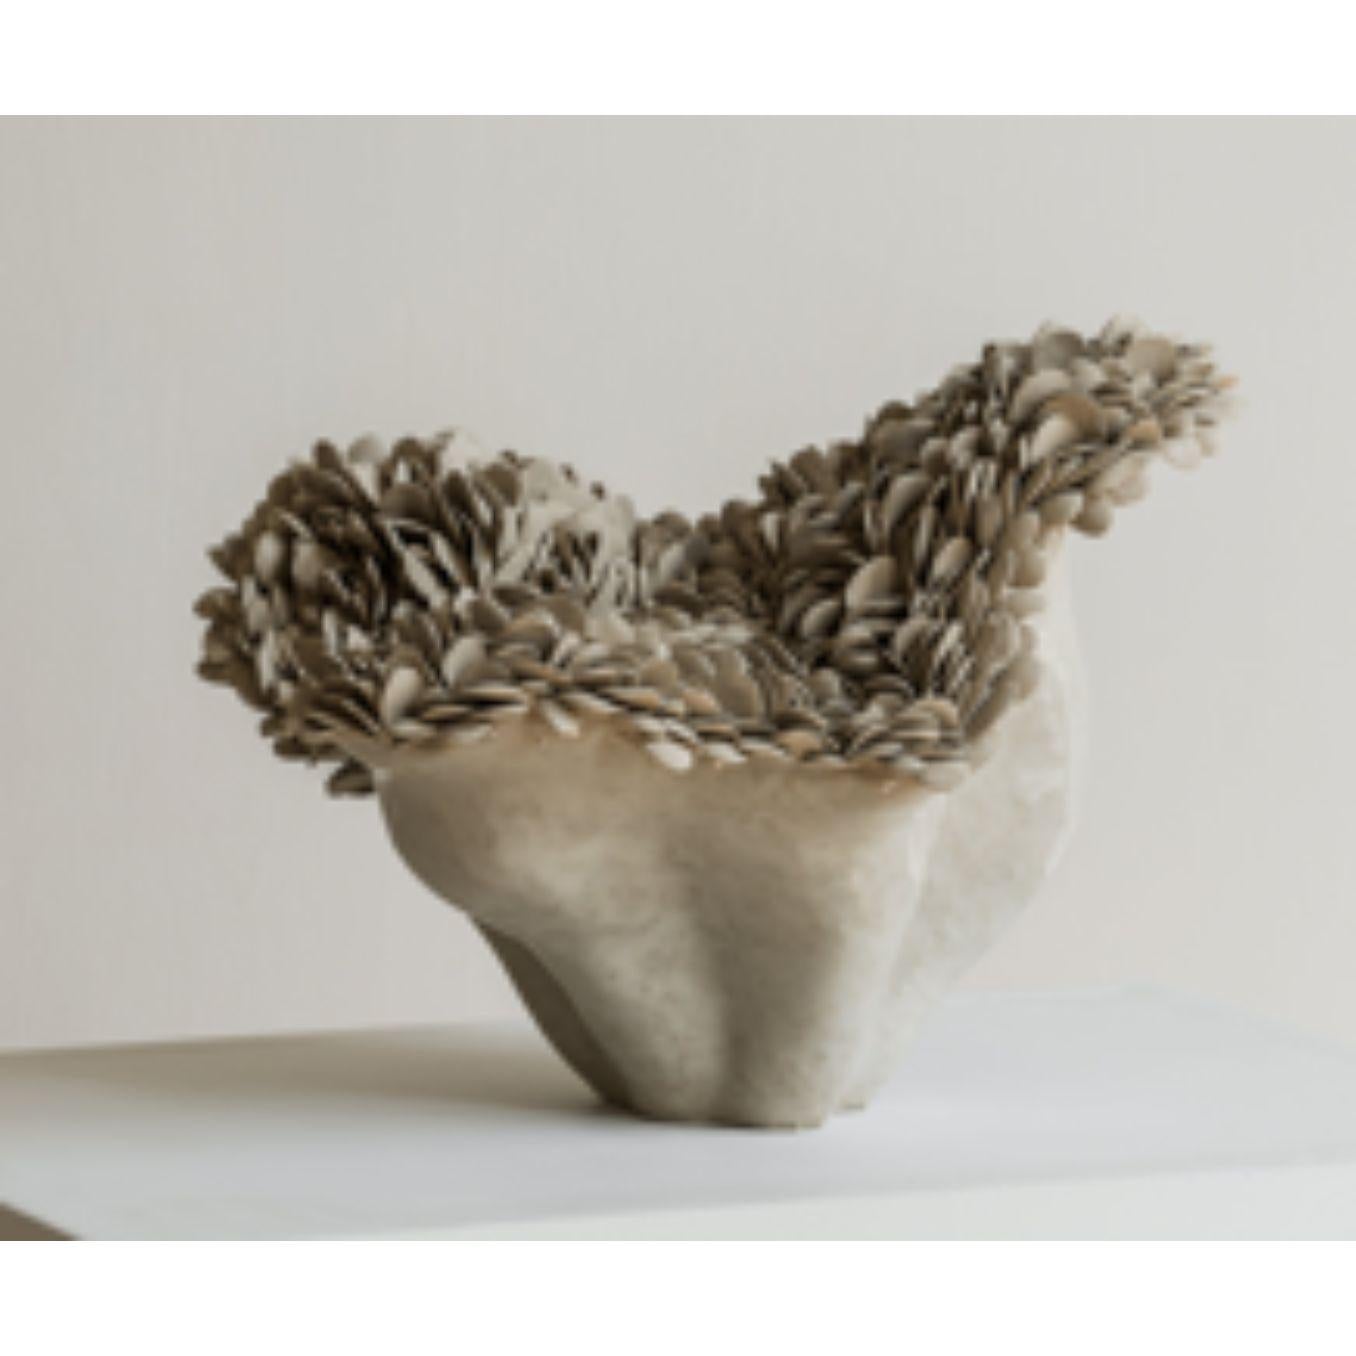 Nubes small sculpture by Hanna Heino
Dimensions: D 28 x W 32 x H 30 cm
Materials: Handbuilt, Stoneware Clay
Also available in different dimensions. 


Hanna Heino is a contemporary clay artist from Finland known for her delicate form language